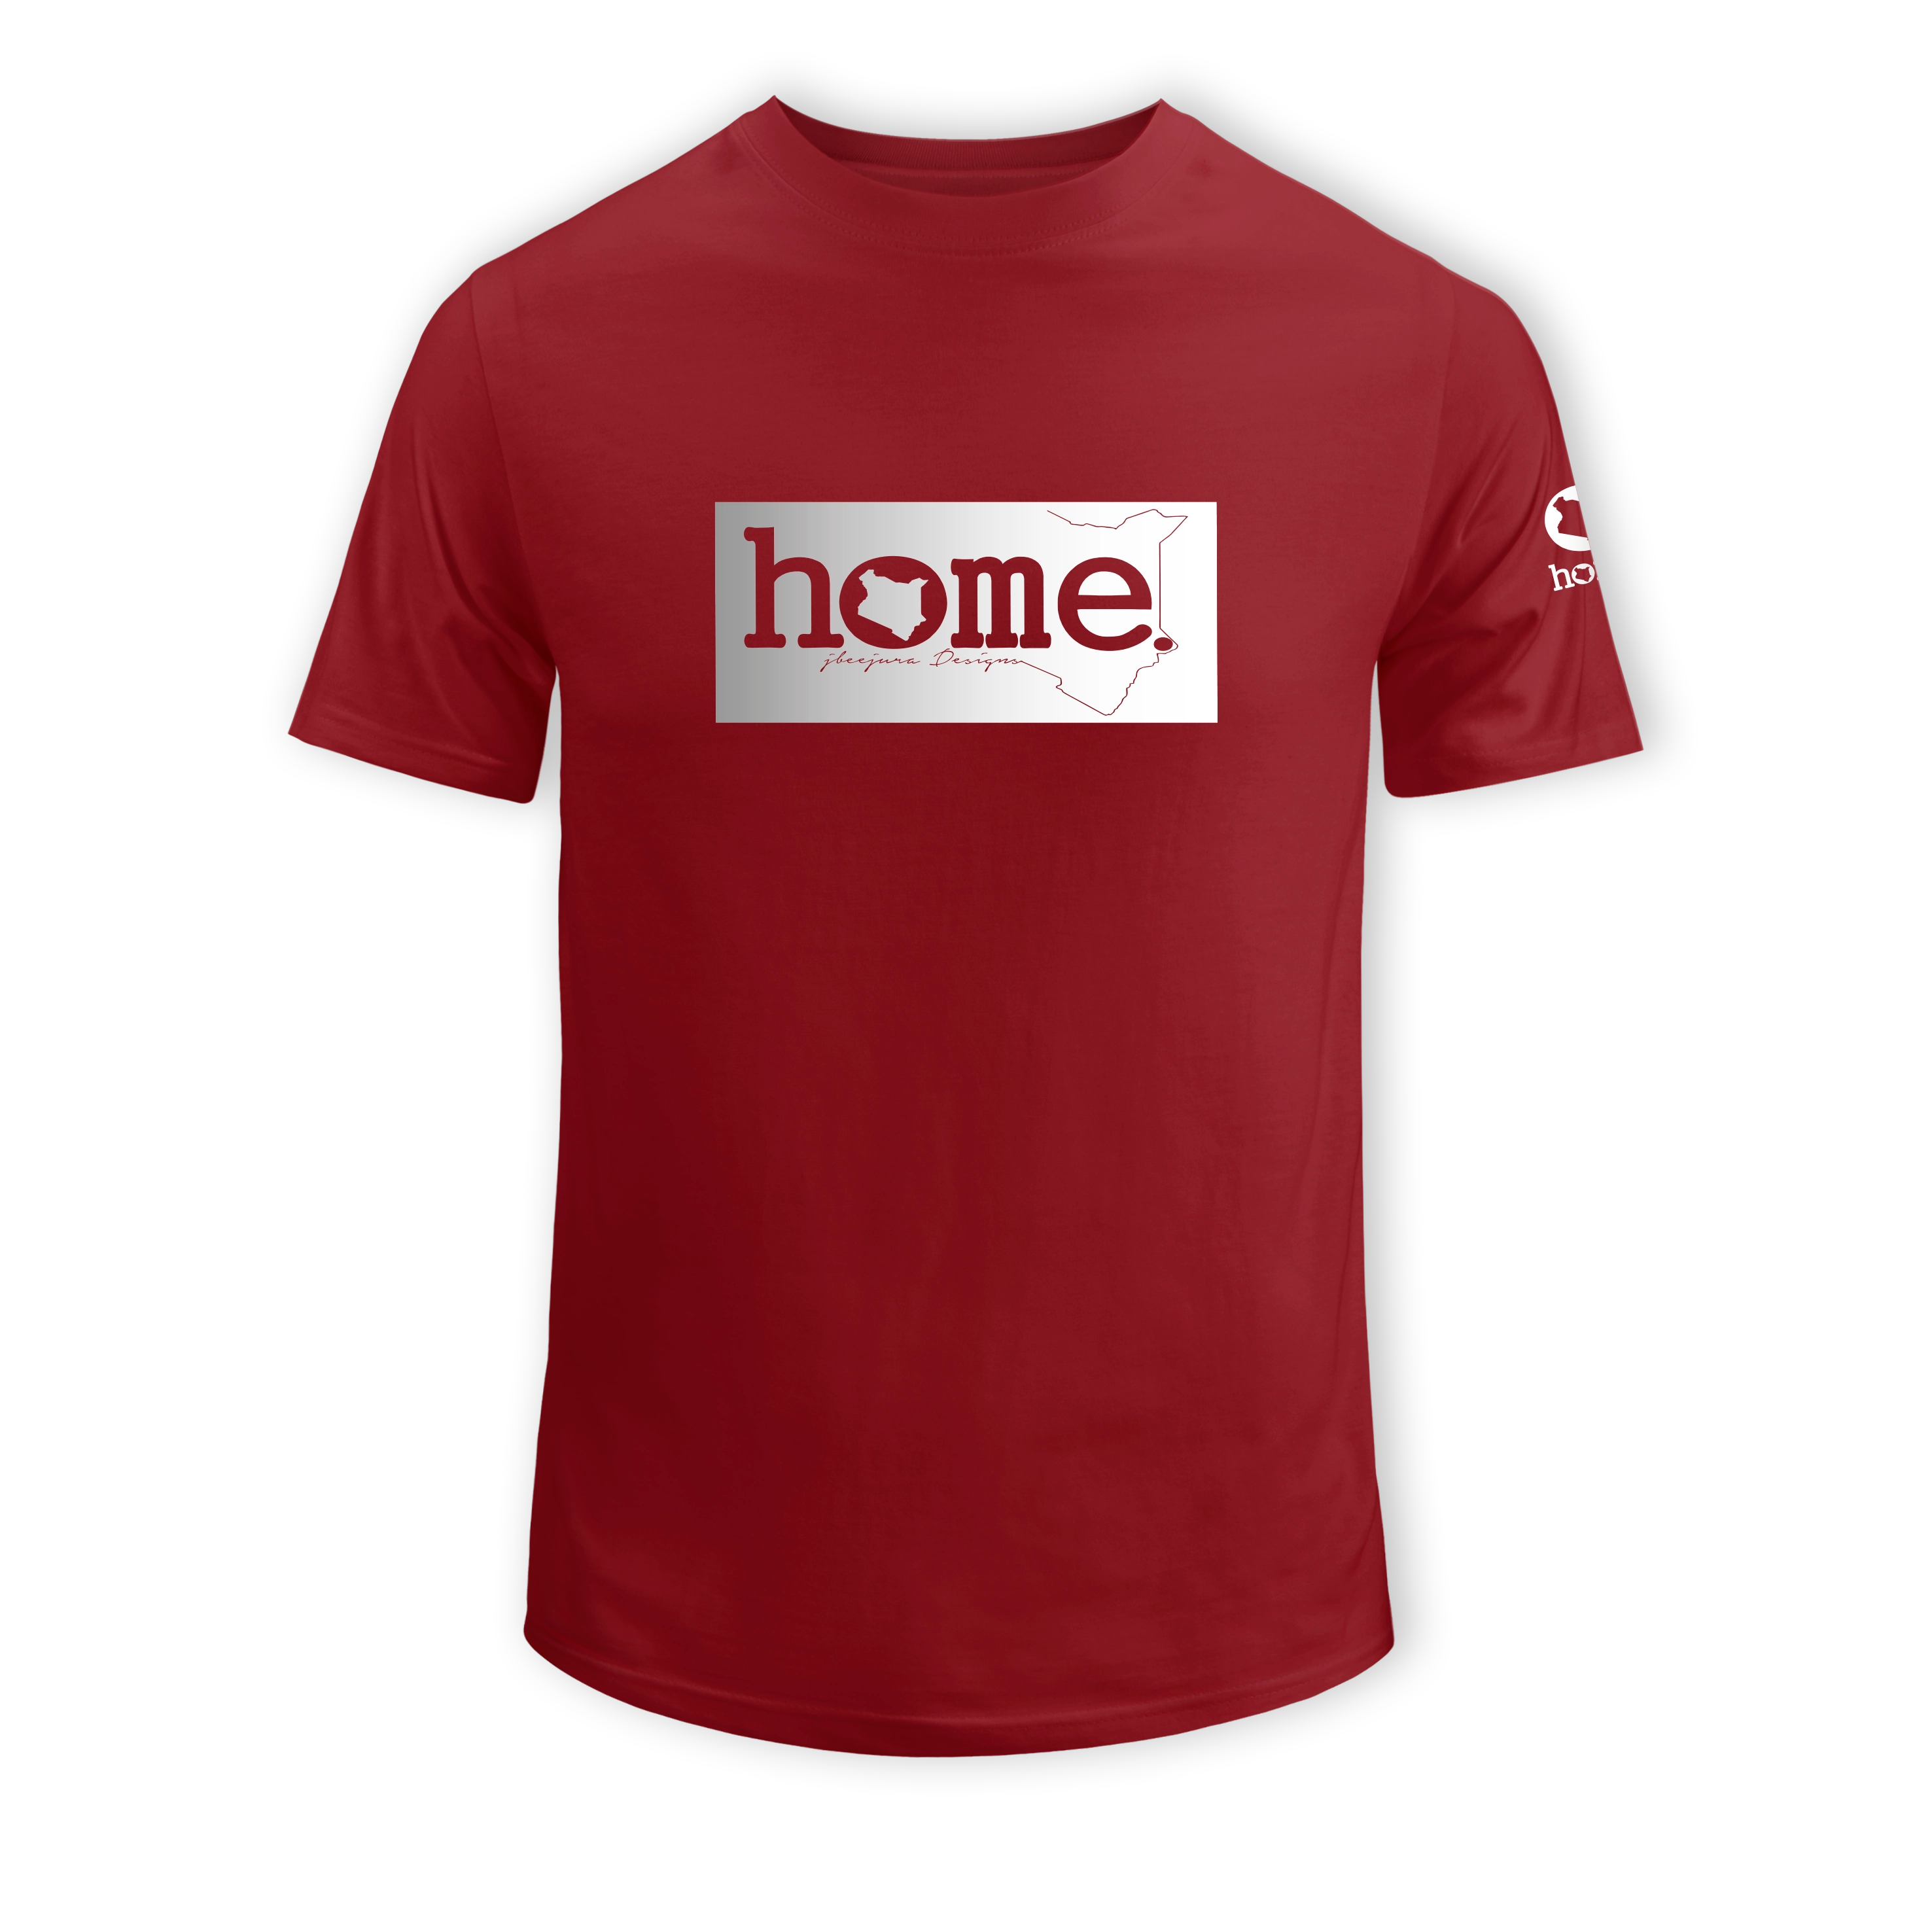 home_254 KIDS SHORT-SLEEVED MAROON RED T-SHIRT WITH A SILVER CLASSIC PRINT – COTTON PLUS FABRIC